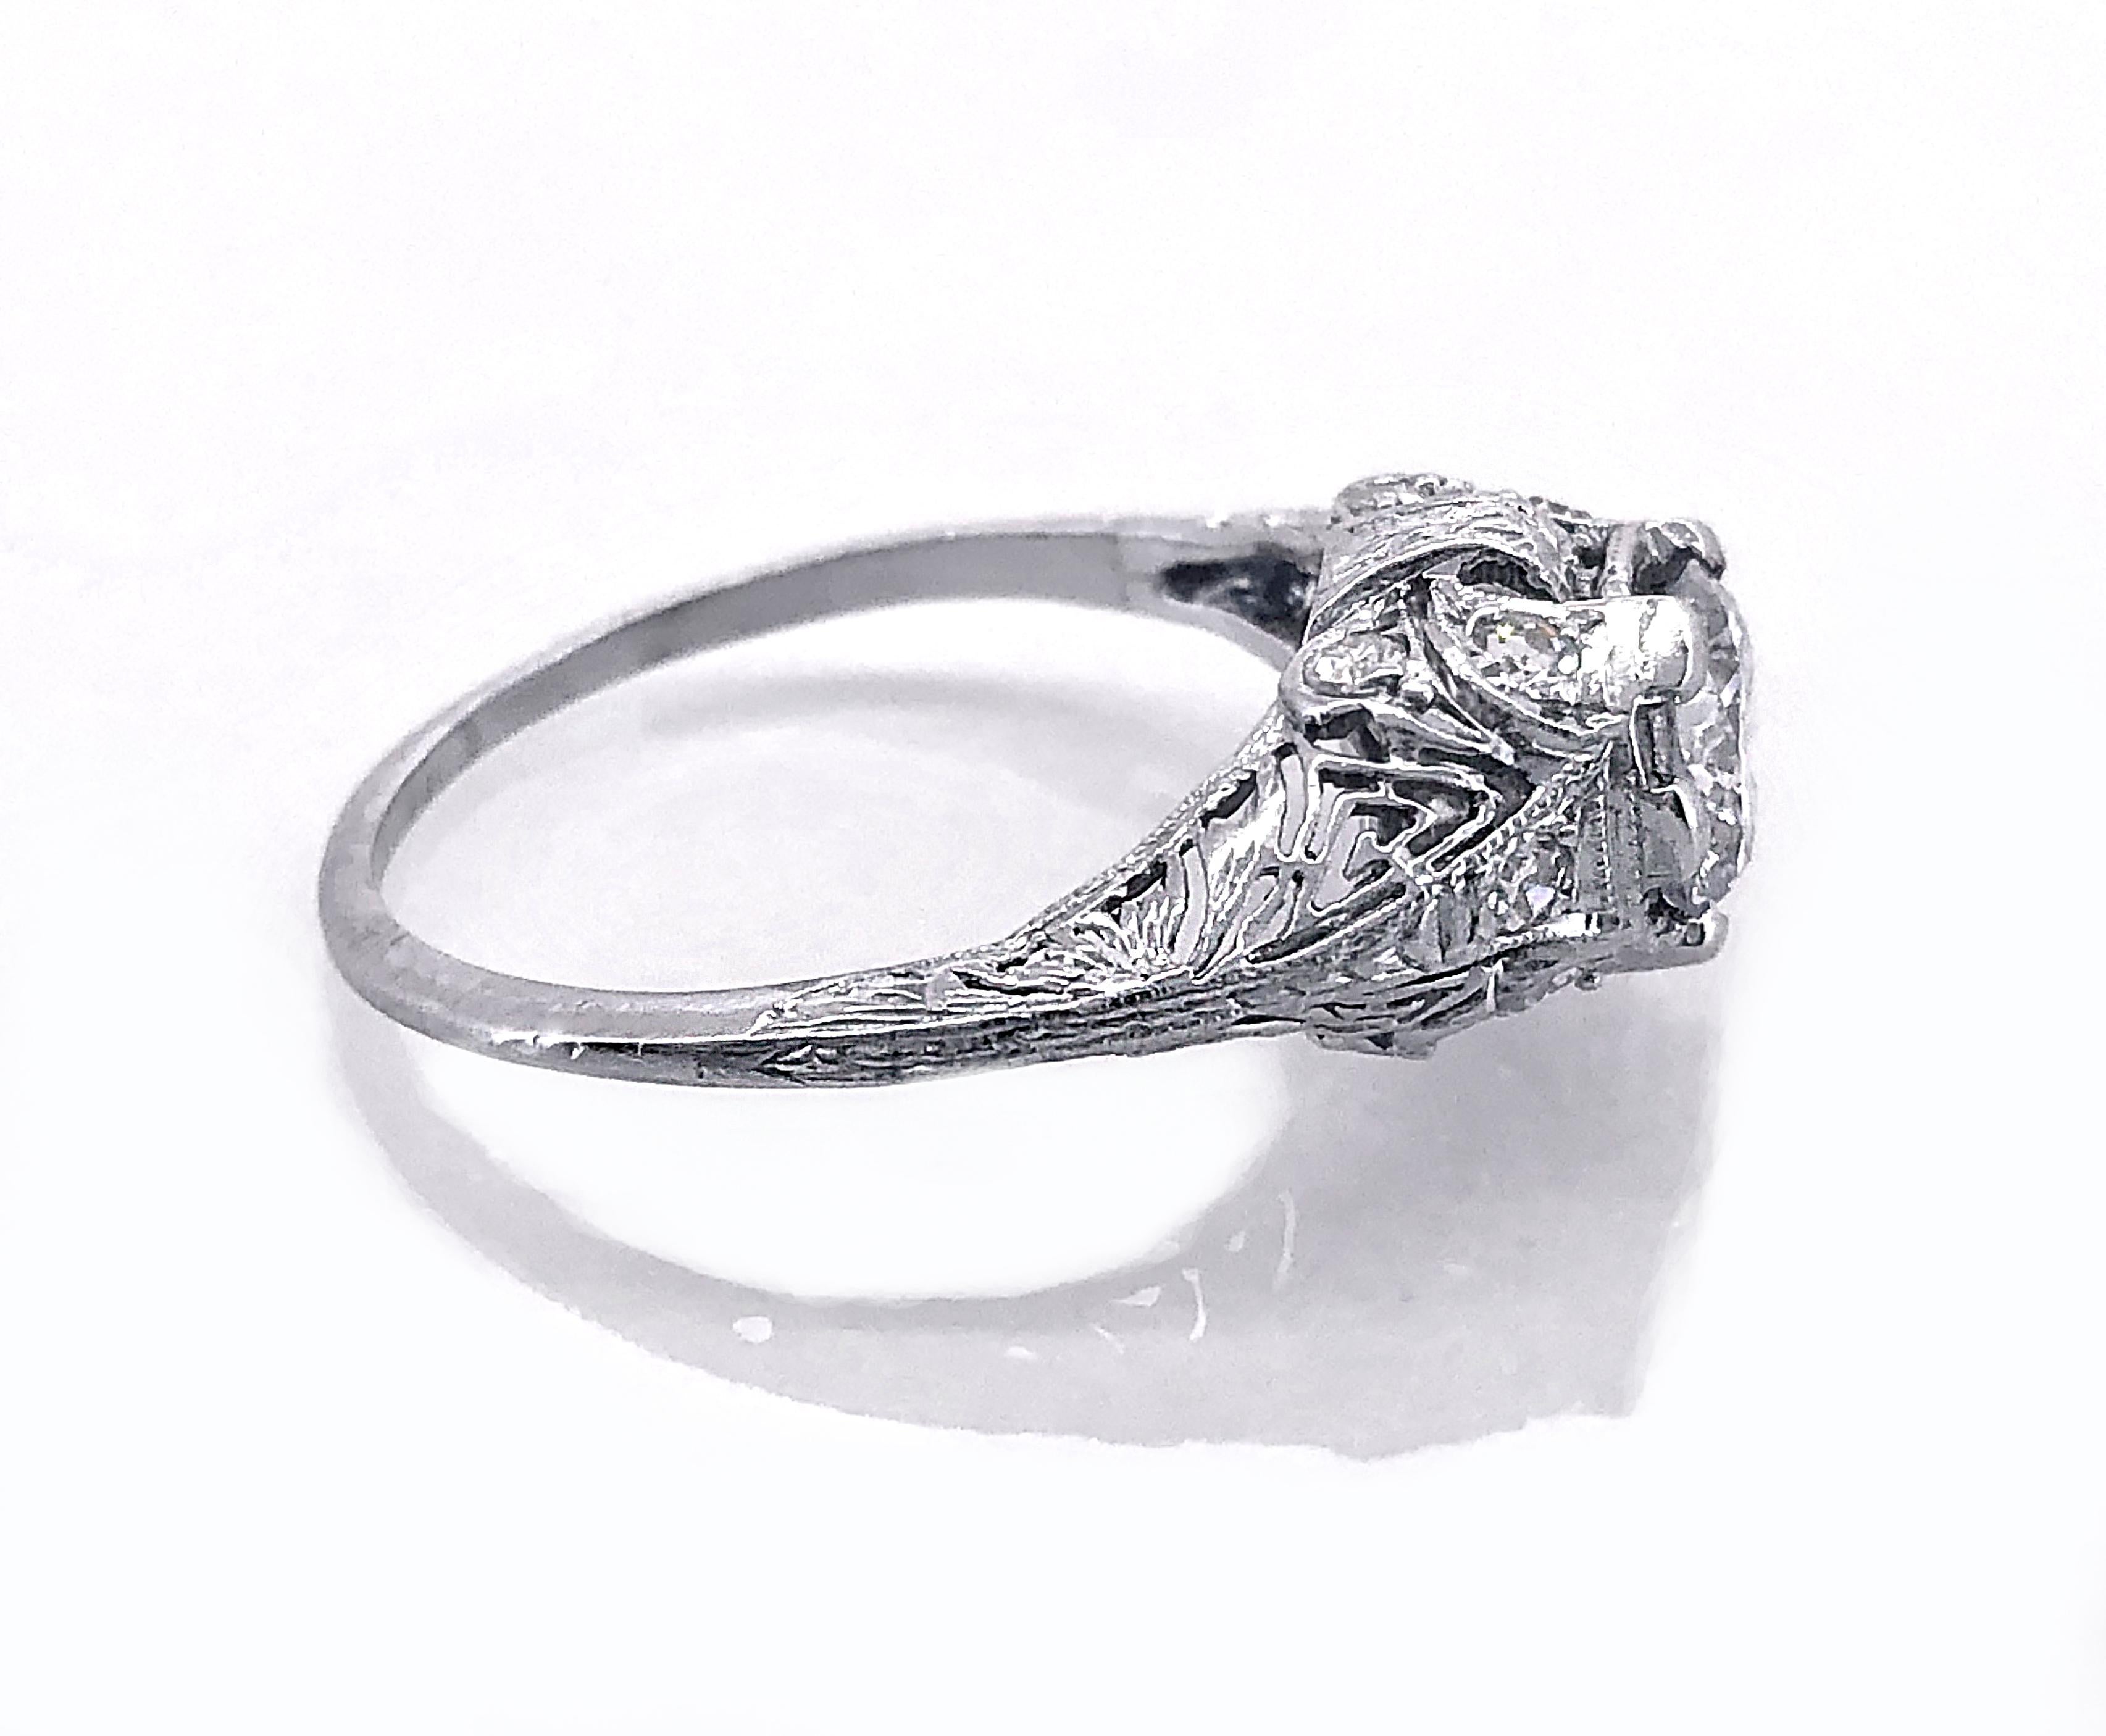 An Edwardian platinum and diamond Antique engagement ring featuring a .94ct. apx. diamond center of SI2 clarity and J color. This ring exhibits intricate filigree and .20ct. apx. T.W. of accenting diamonds. The complimenting diamond and meticulous